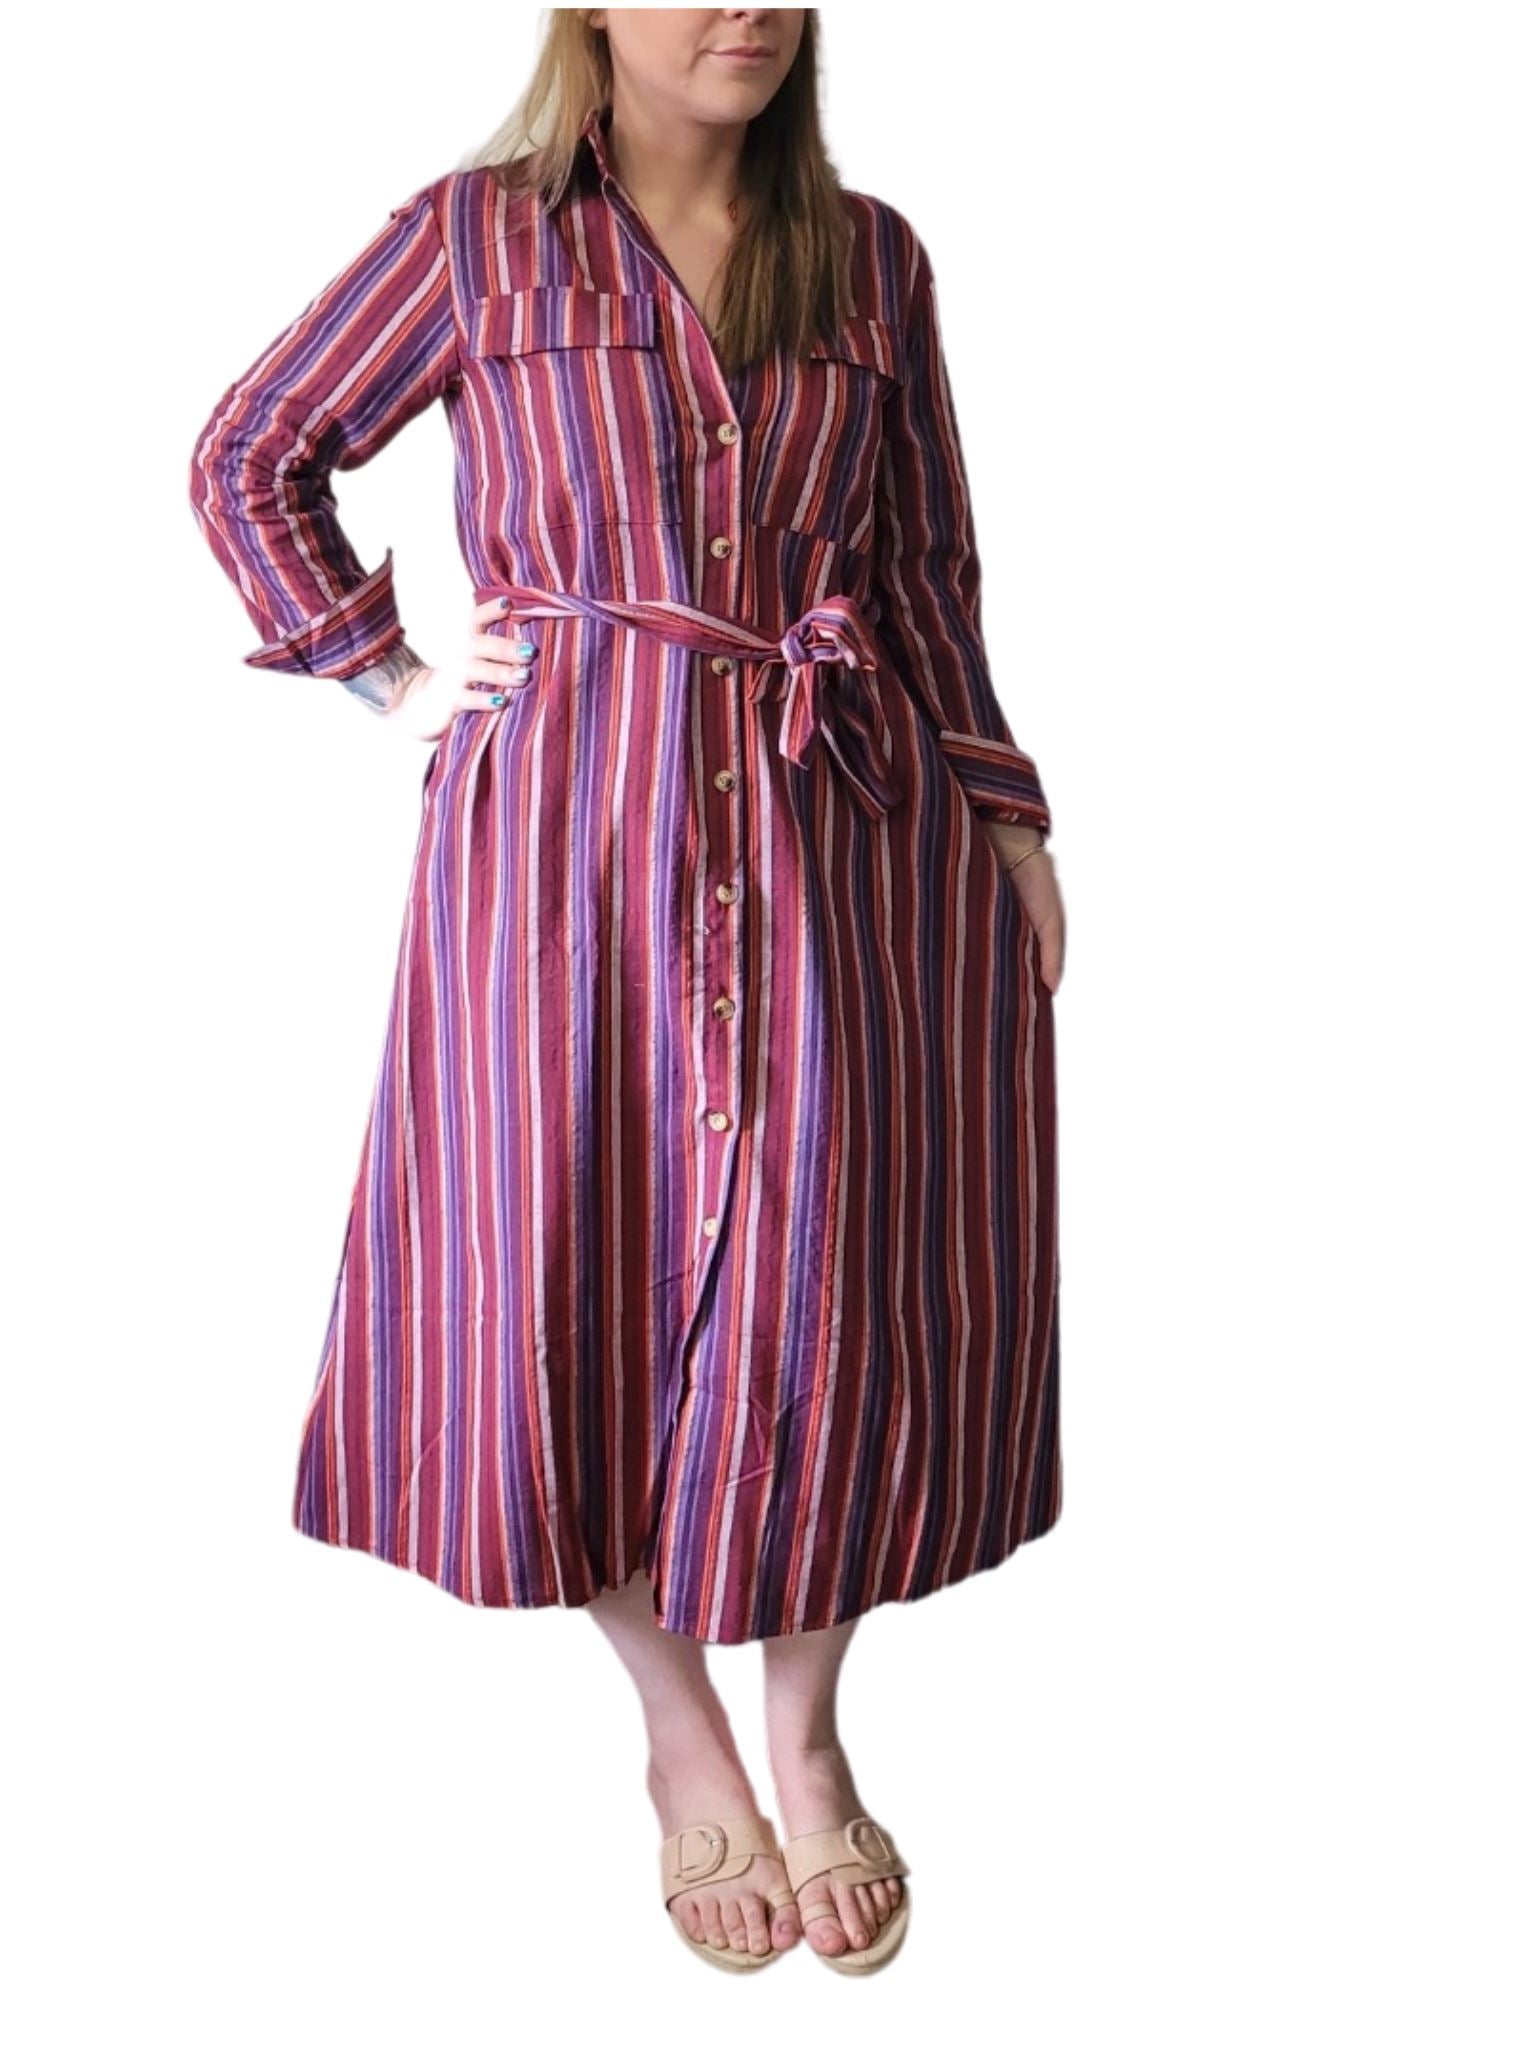 BULLA Stripe long button Dress 2 colours- Blue and Maroon/Pink Stripe Dress Aambers Goodies xx 8-10 au (S-M) MAROON/PINK 